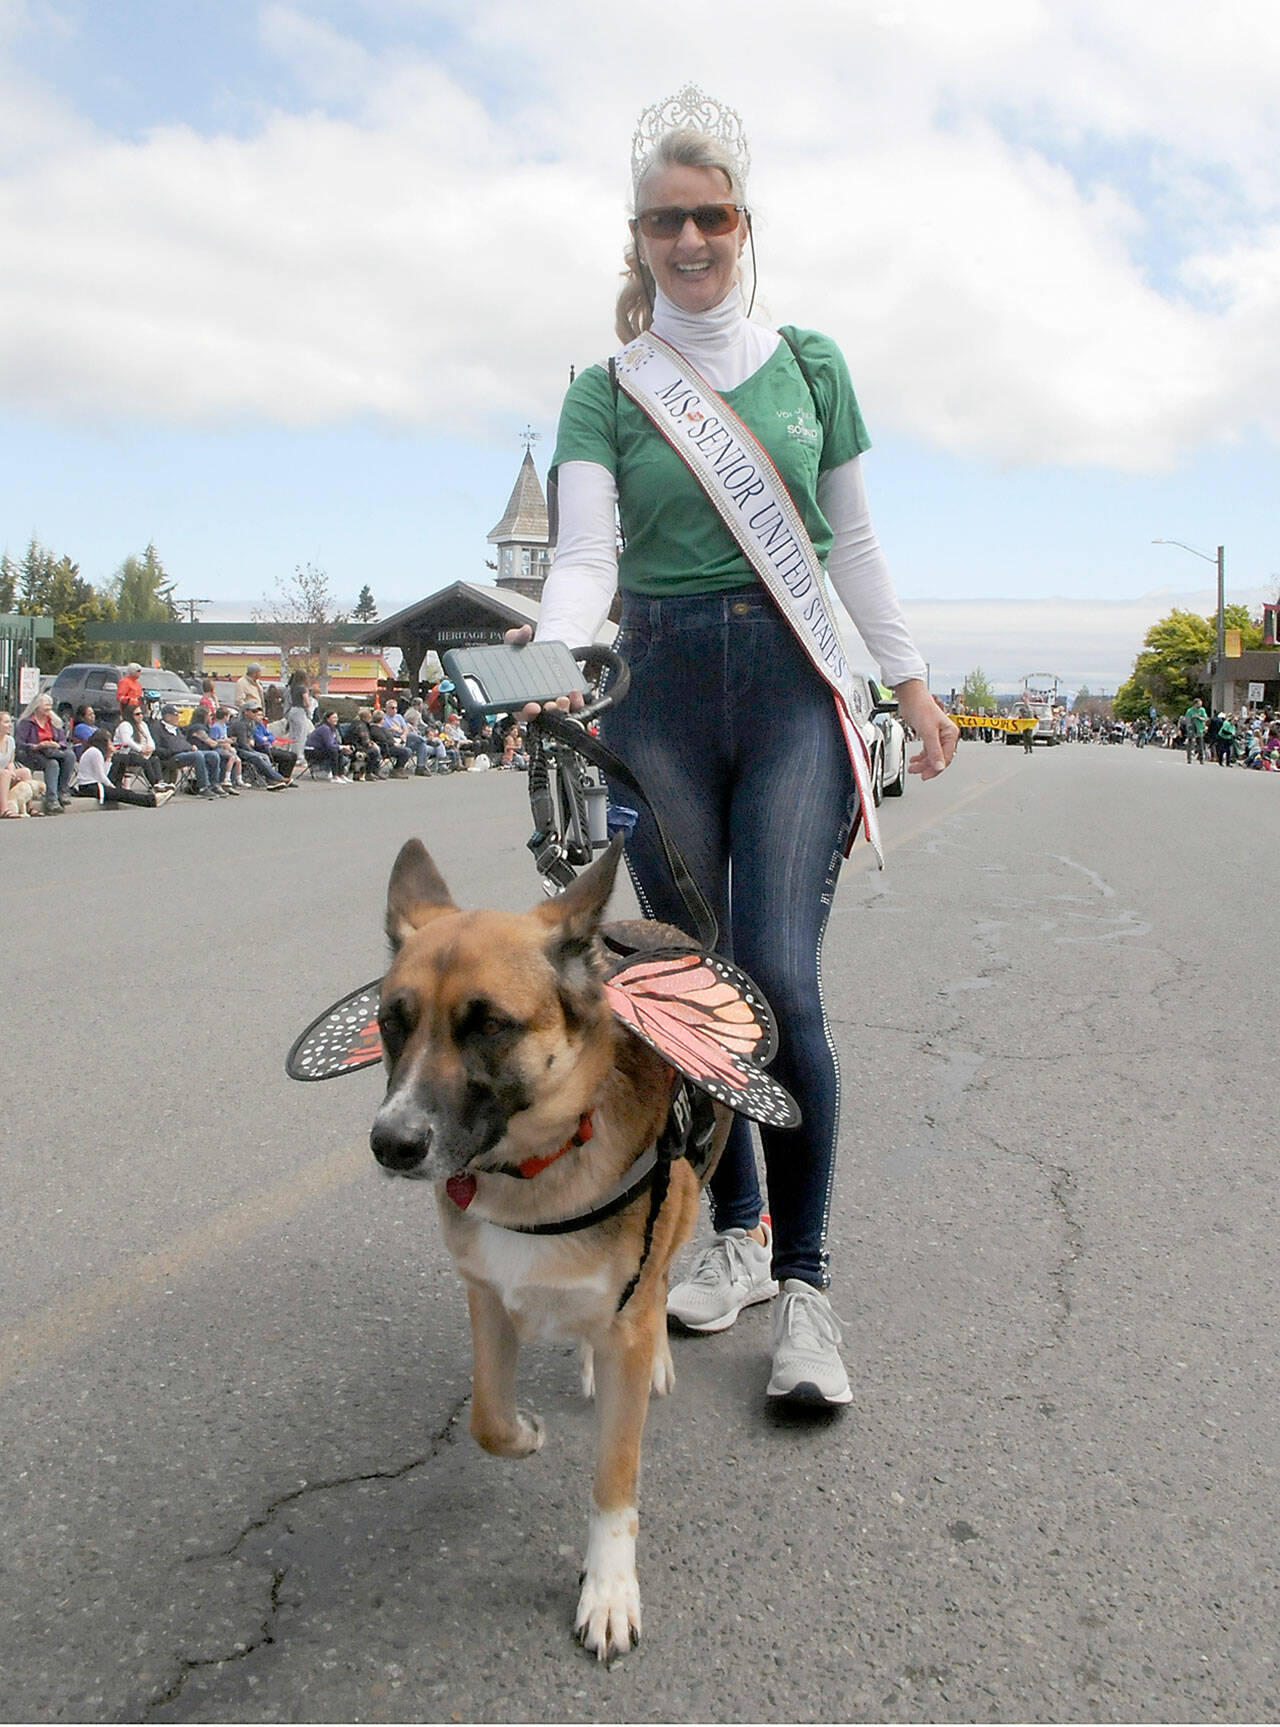 Captain-Crystal Stout of Sequim, Ms. Senior United States 2020, and her dog, Lucee-Light, march in Saturday’s parade. (Keith Thorpe/Peninsula Daily News)